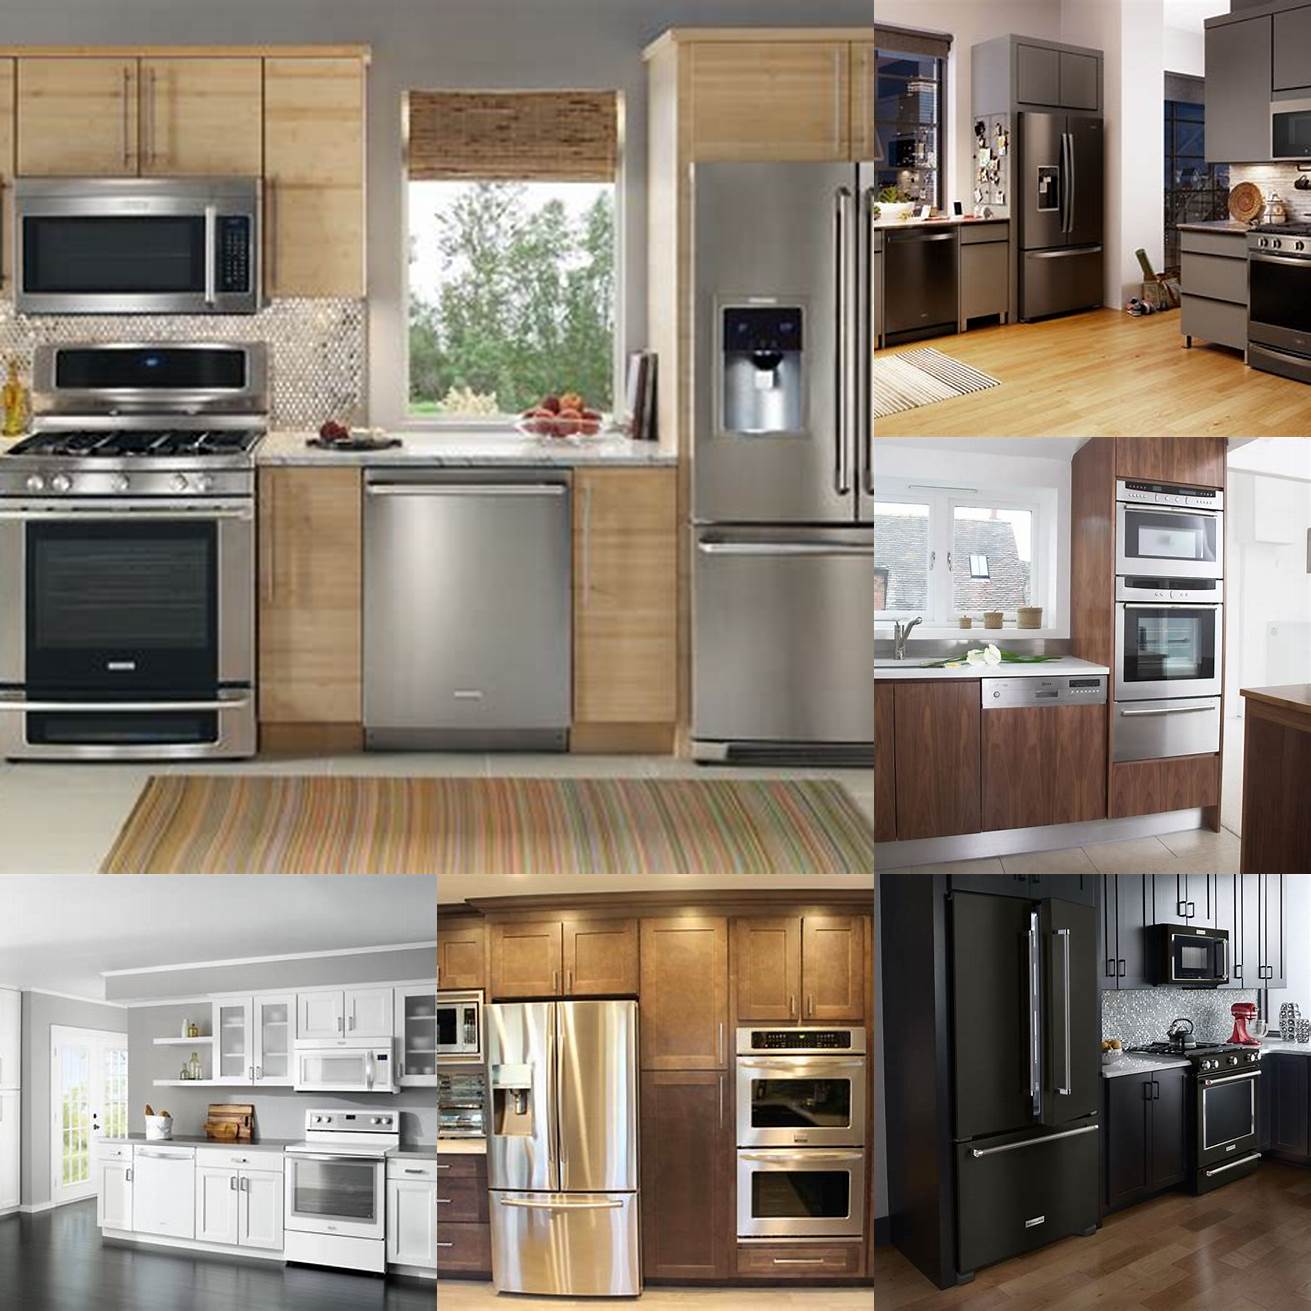 2 Consider the size and placement of your appliances Make sure your appliances fit your space and are located in a functional and accessible spot